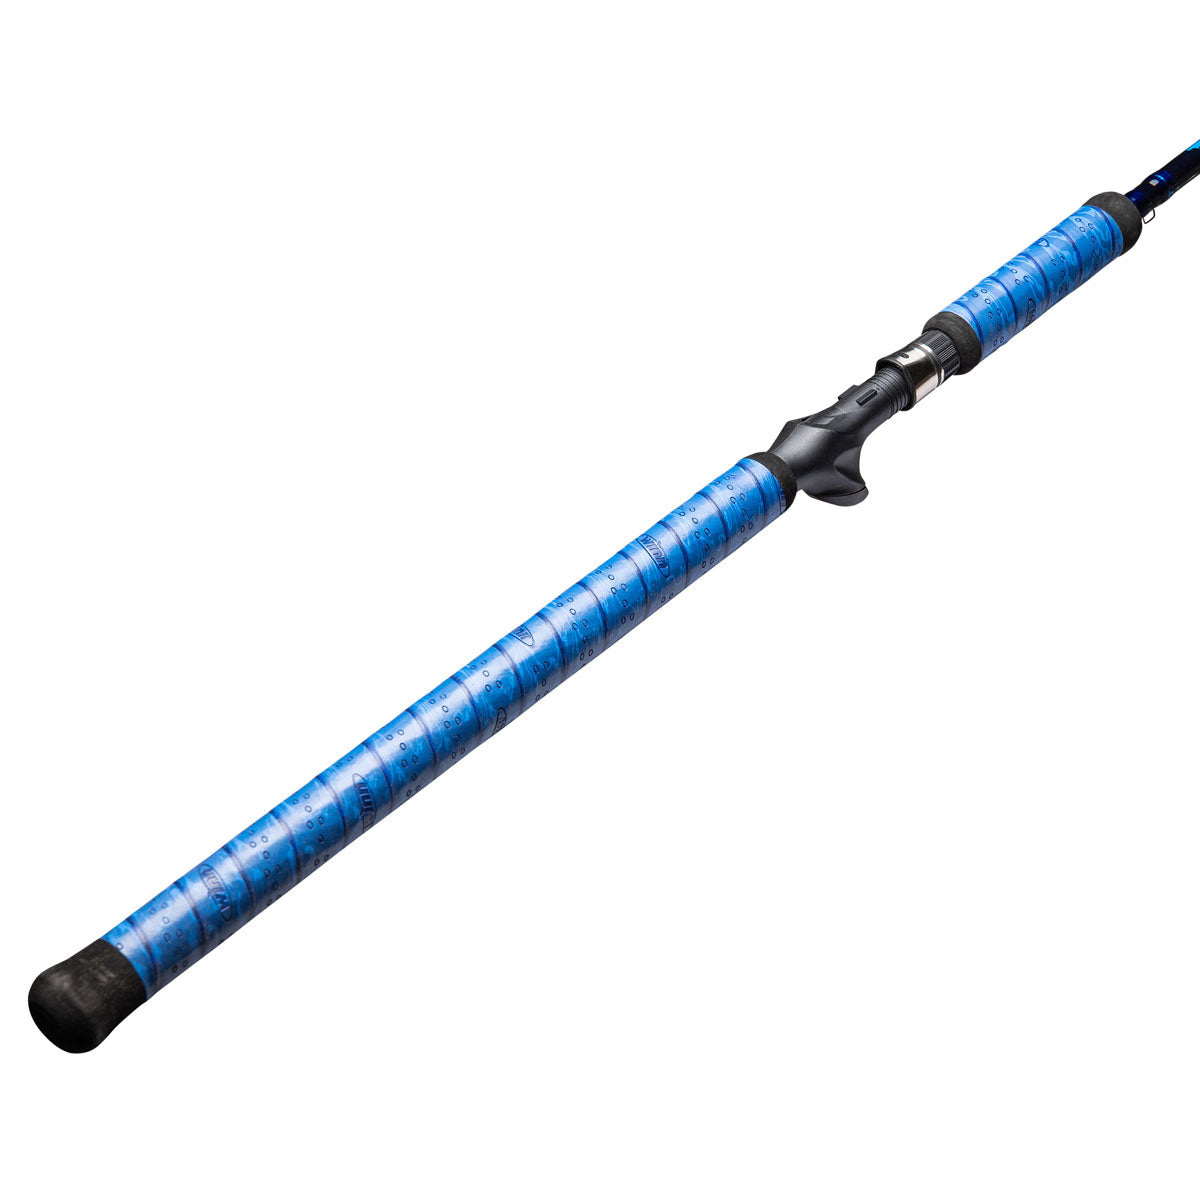 Vexan and TI PRO Fishing Rods